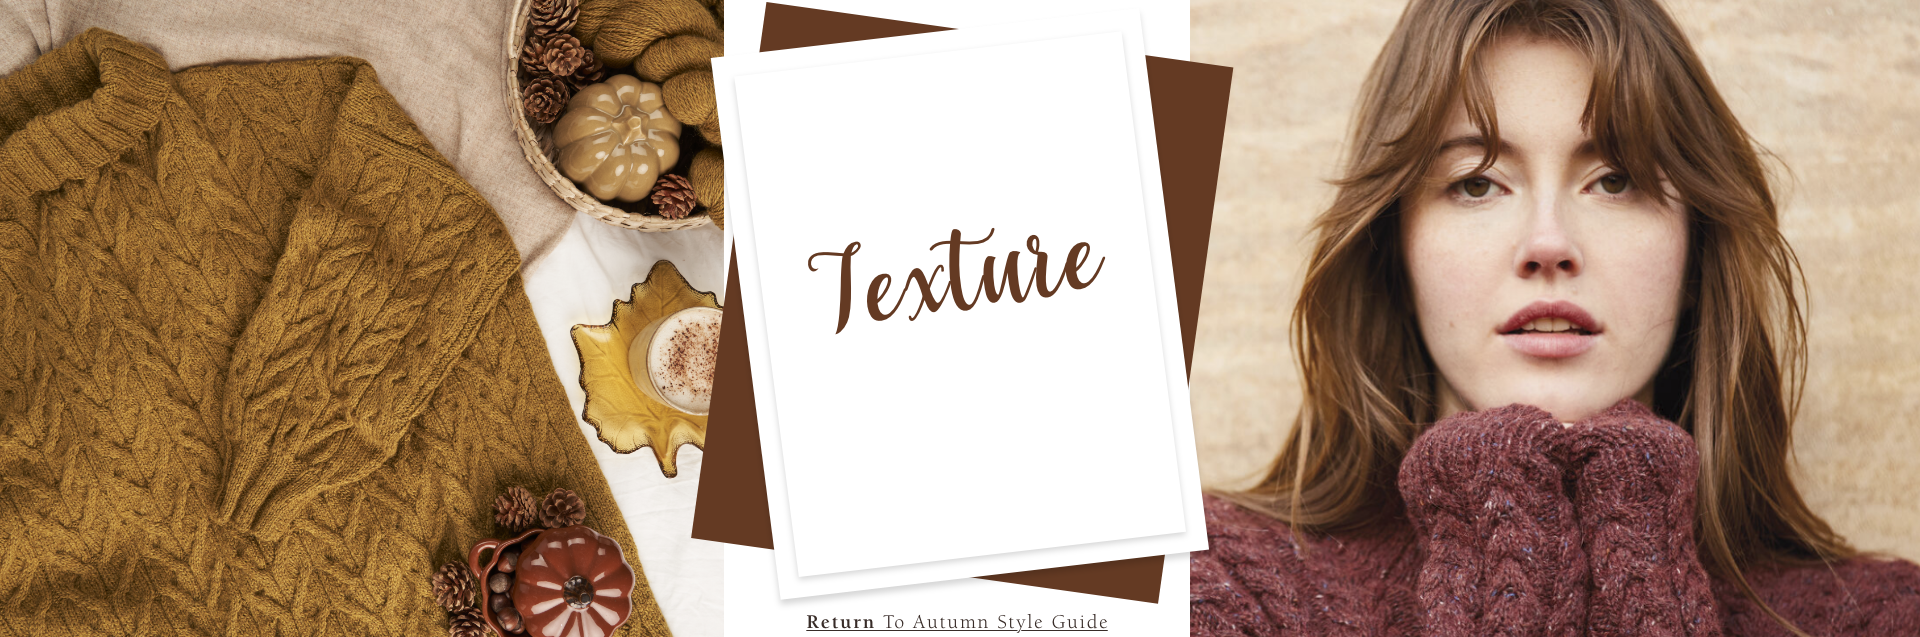 Autumn Style Guide Texture